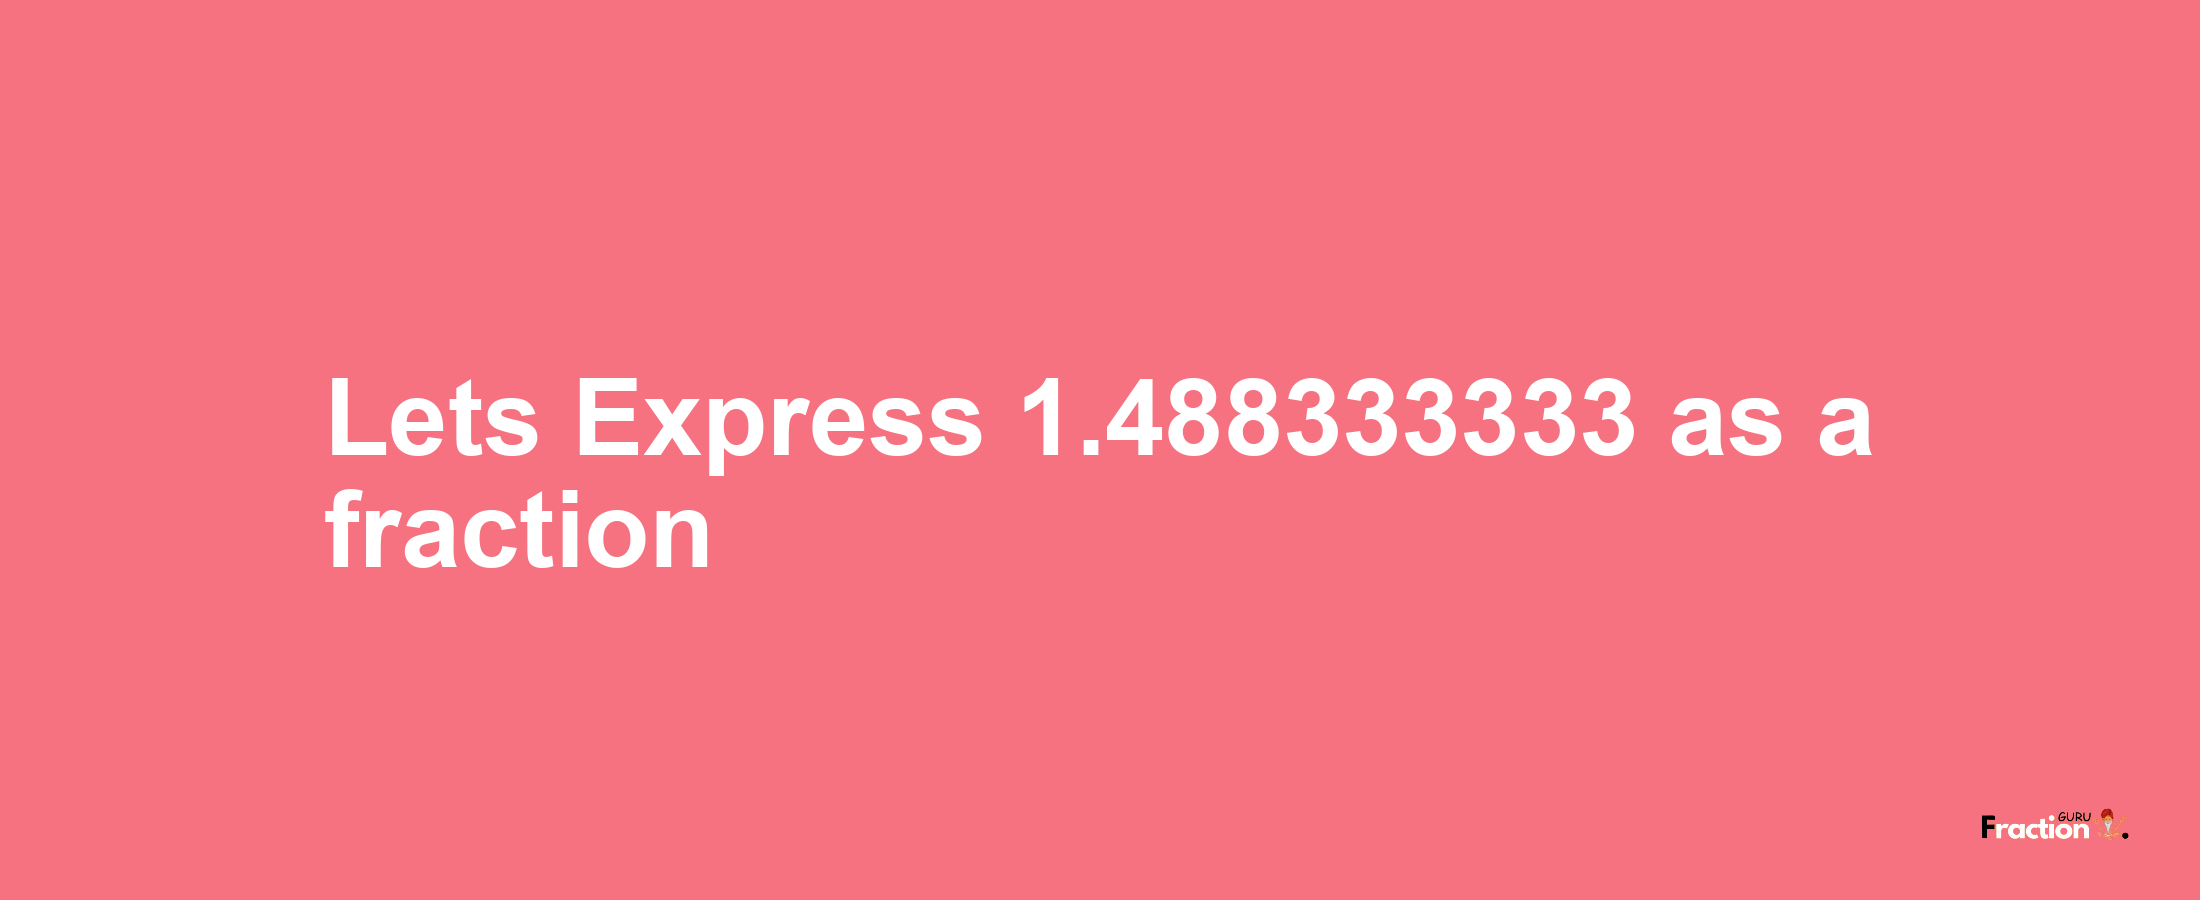 Lets Express 1.488333333 as afraction